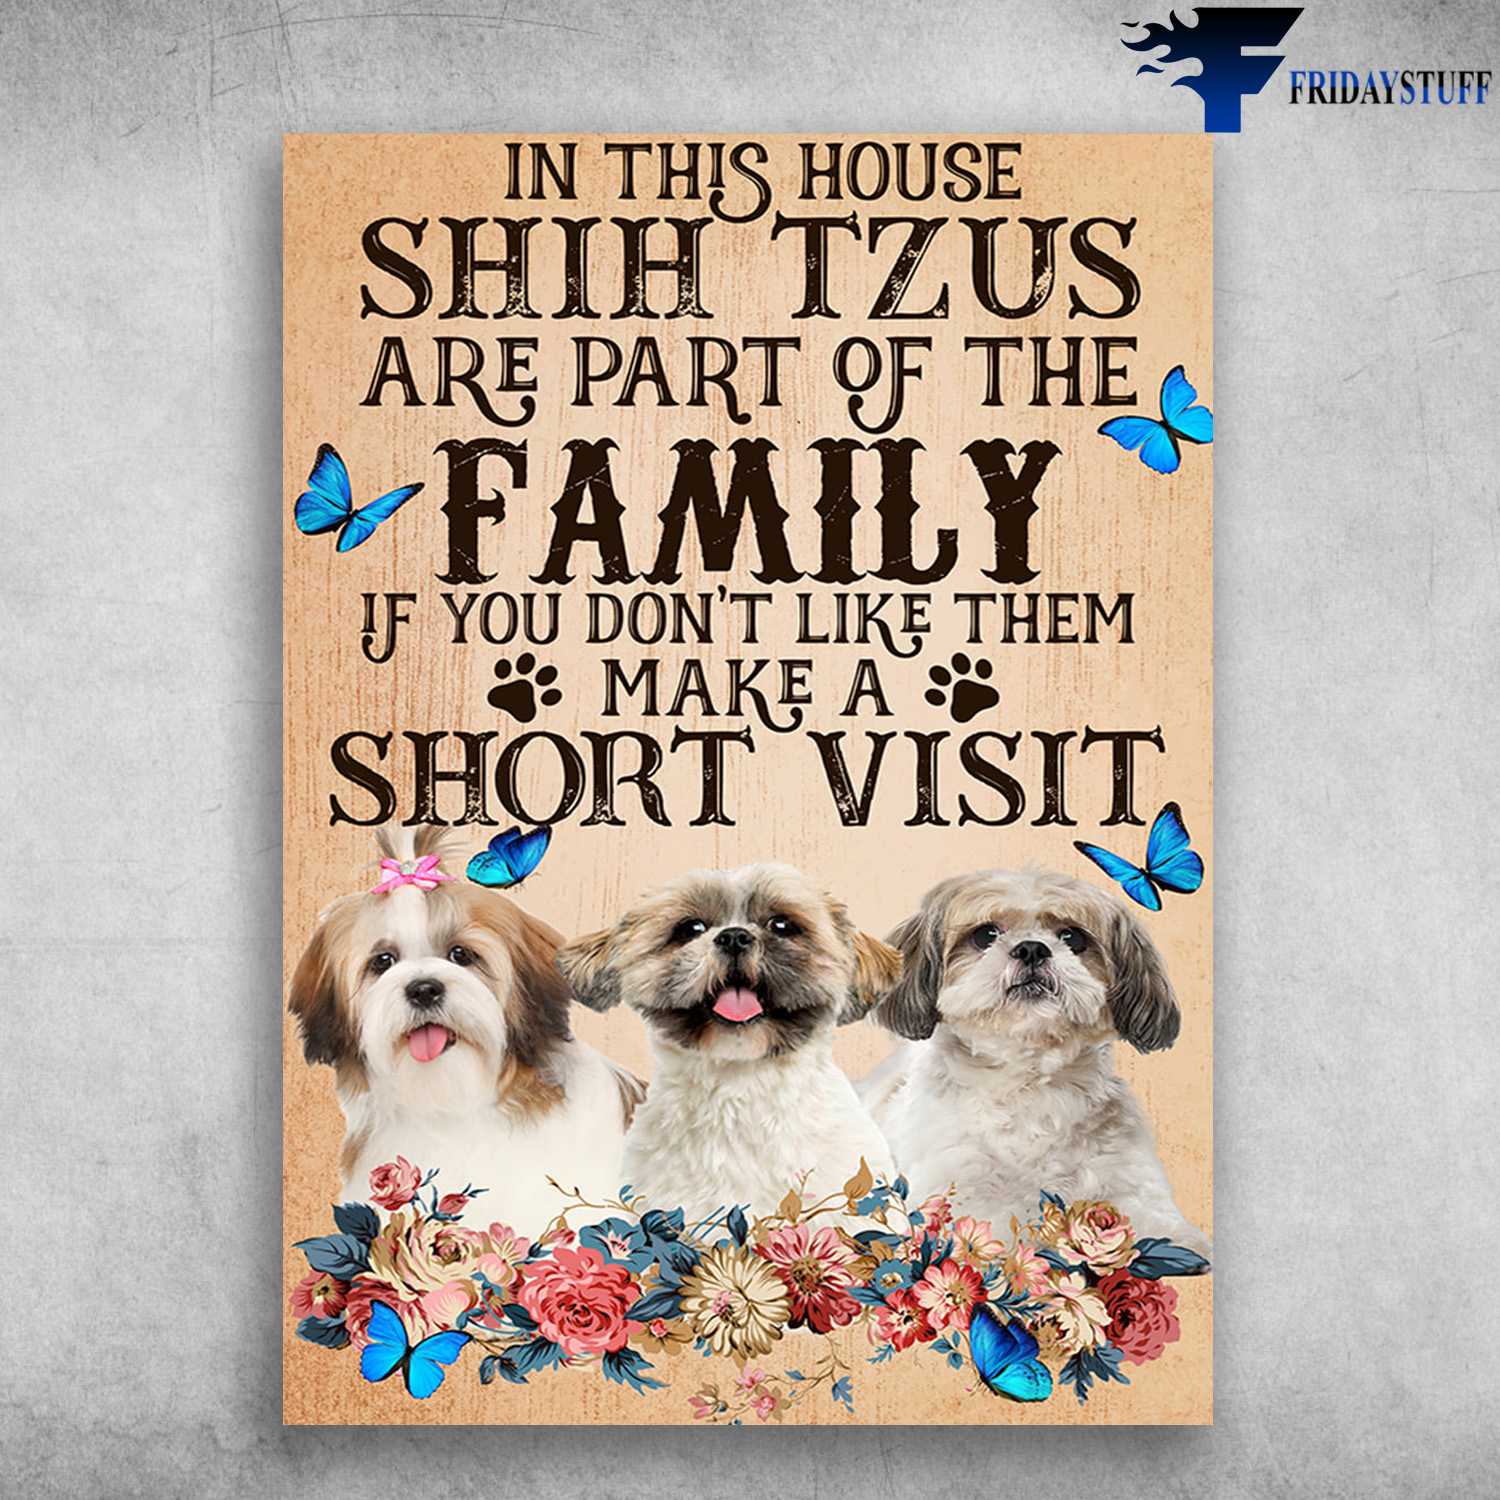 Shih Tzus Family, Dog Lover, Butterfly Flower - In This House, Shih Tzu Are Part Of The Family, If You Don't Like Them, Make A Short Visit